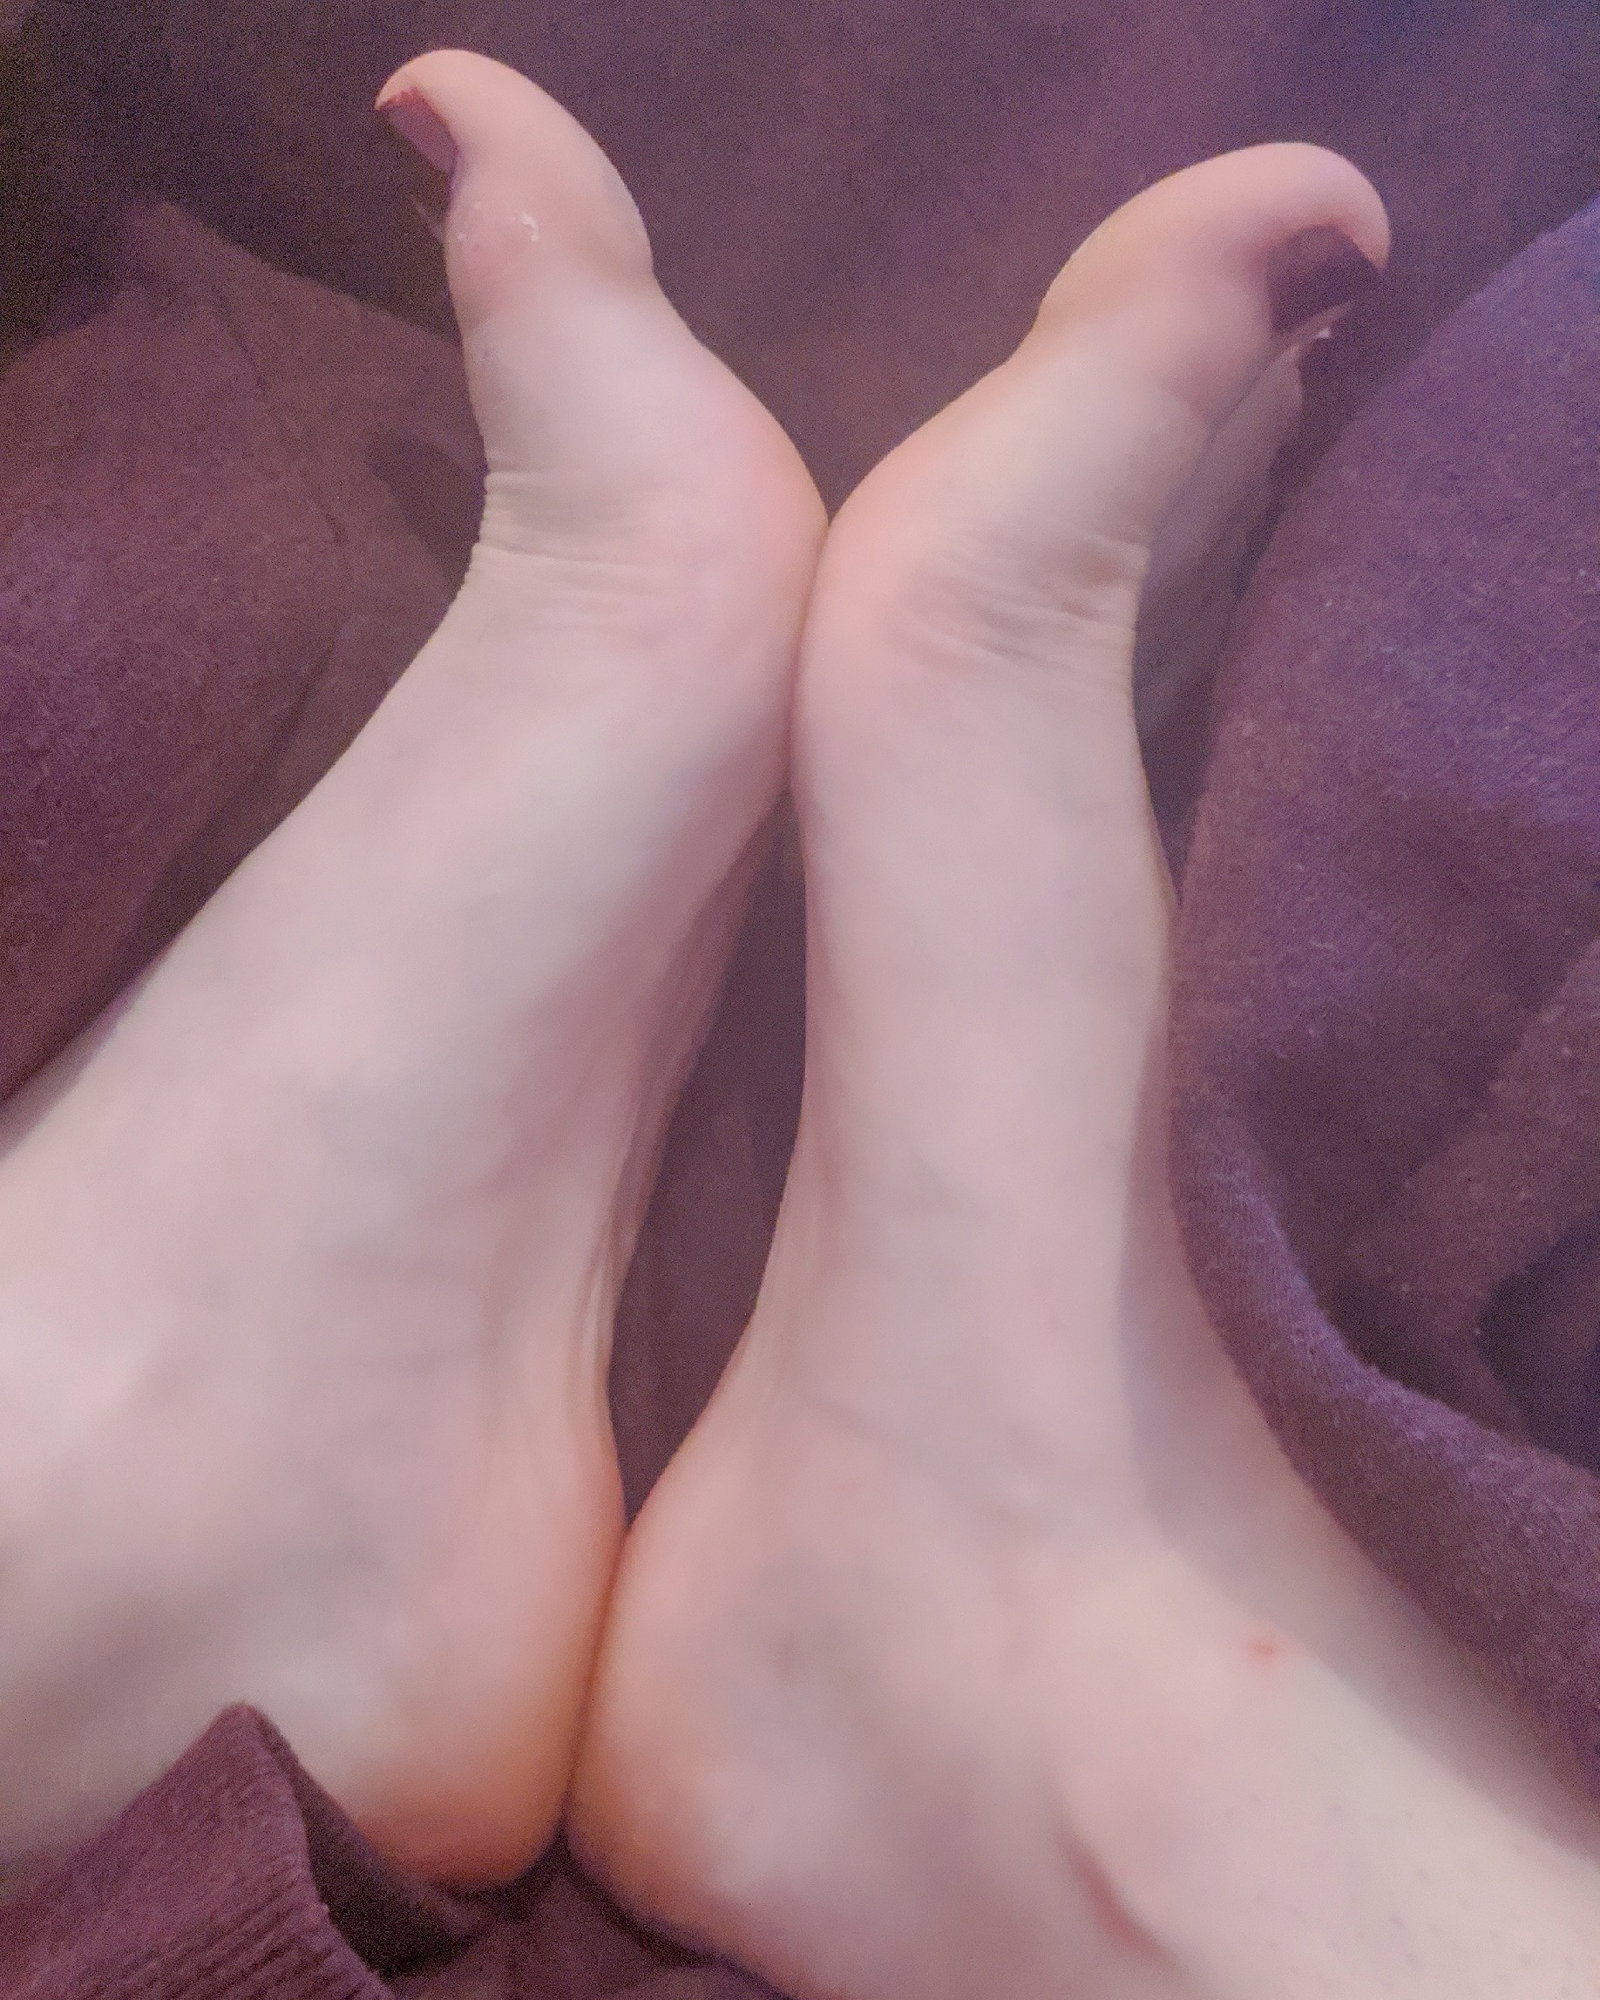 Photo by unigirlsfeet with the username @unigirlsfeet,  August 30, 2020 at 8:29 PM. The post is about the topic Foot Fetish and the text says 'A gap in my pretty feet for what?
 Message for custom content or reach out to me on twitter, insta or reddit @ unigirlsfeet'